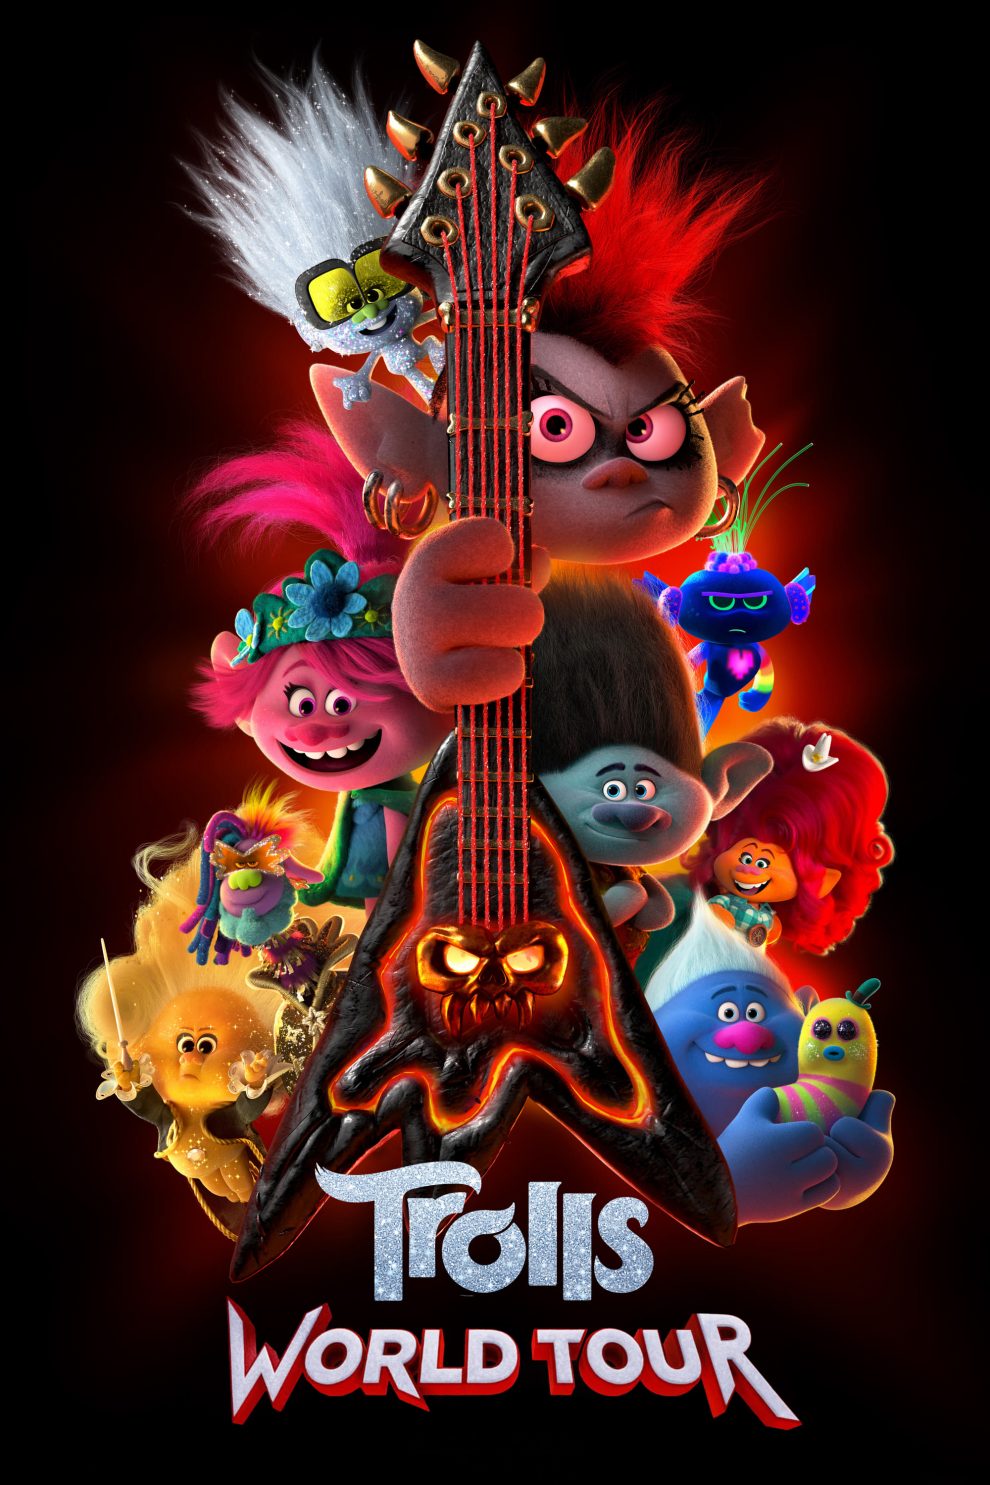 Poster for the movie "Trolls World Tour"